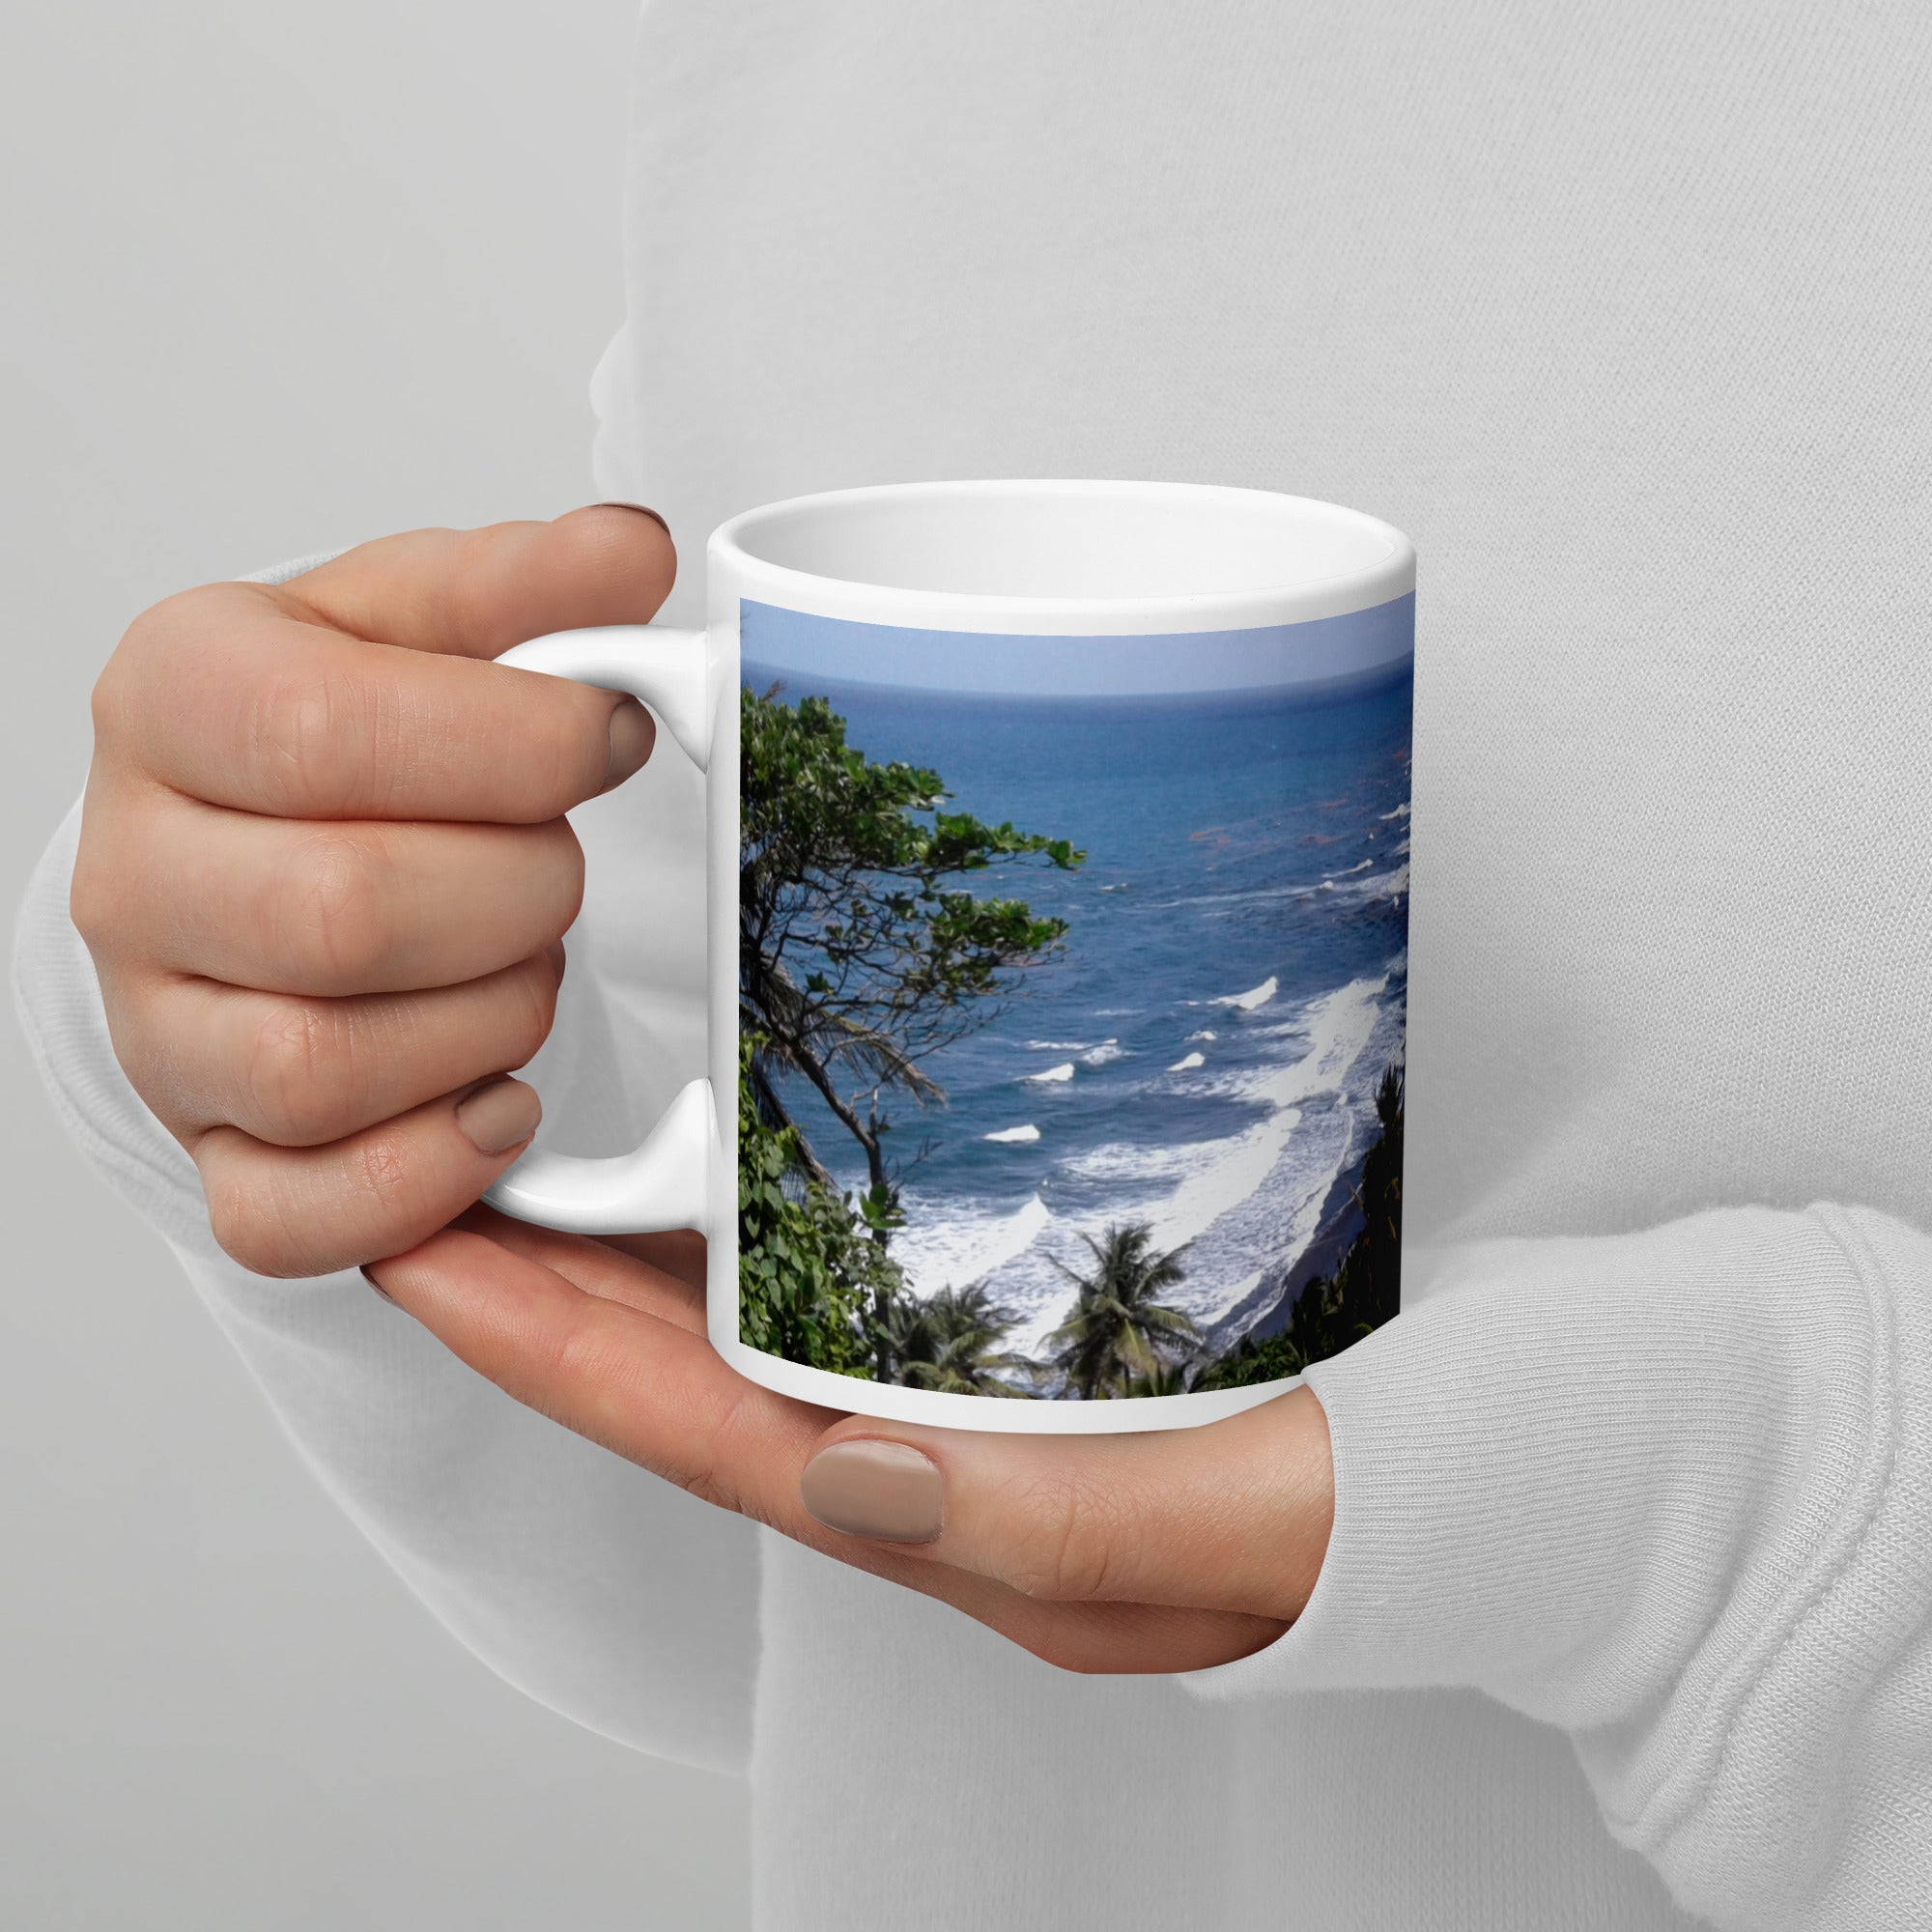 11oz ceramic mug featuring a photograph of Byrea beach in St. Vincent and the Grenadines